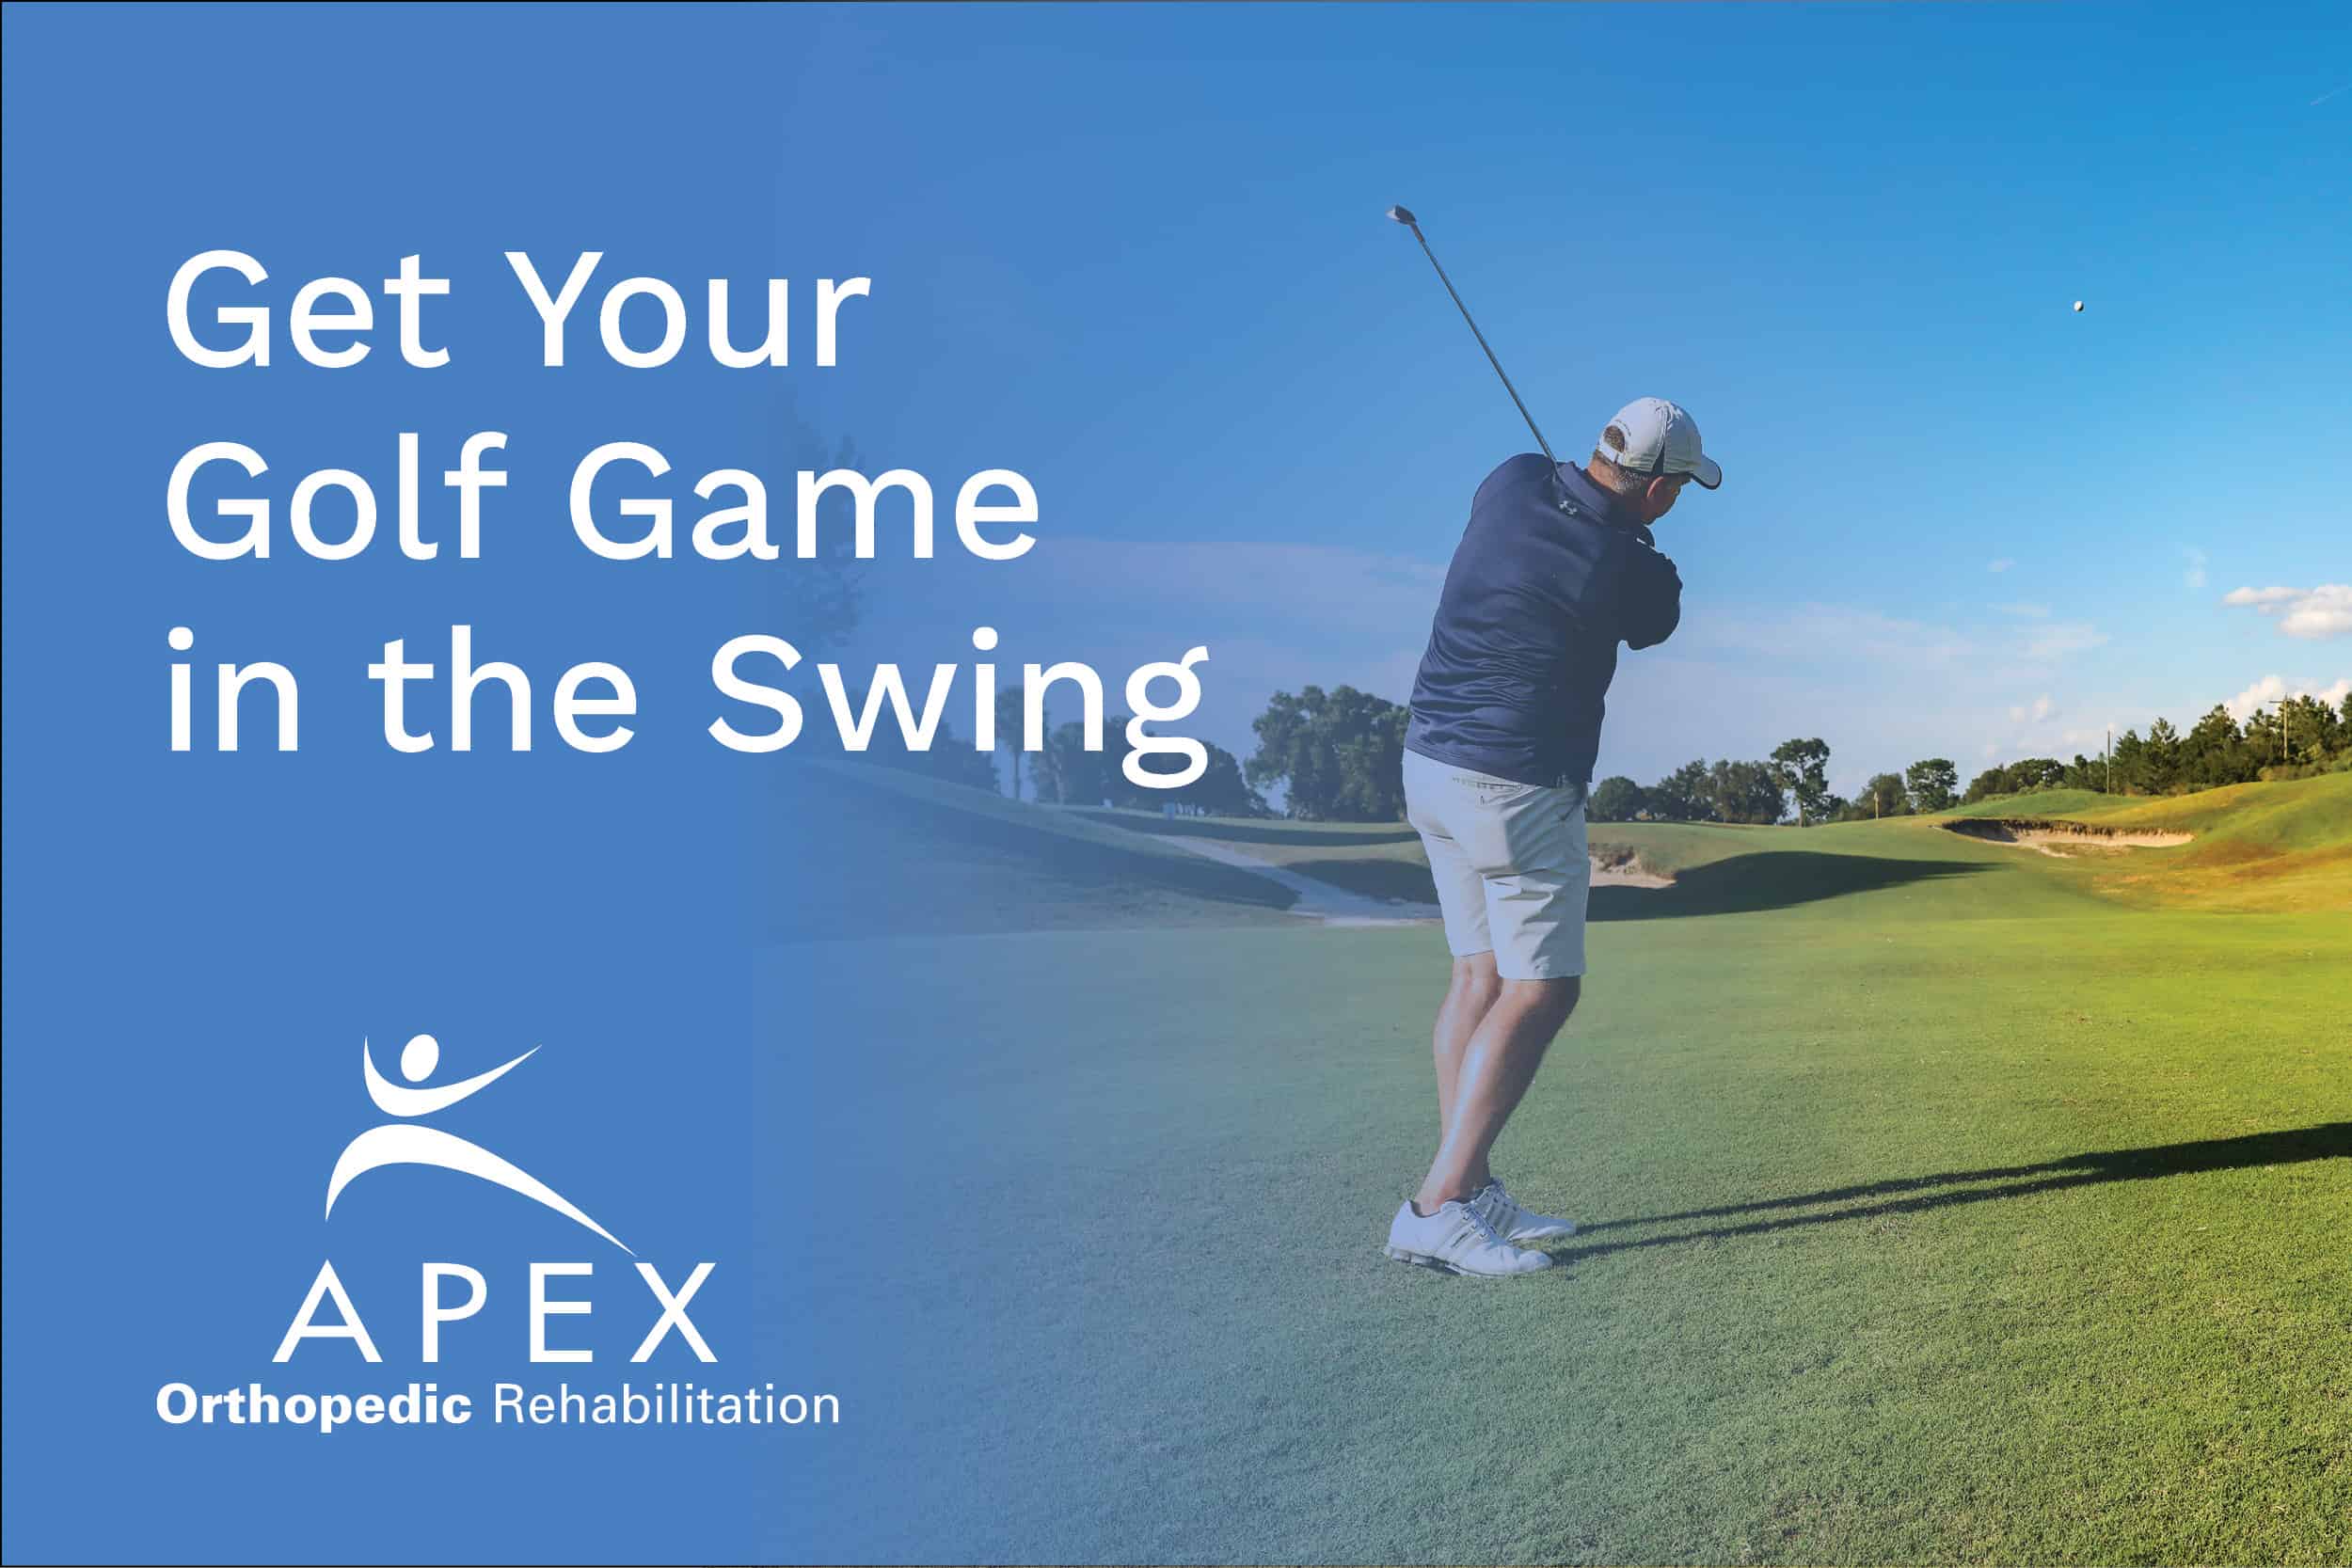 Get Your Golf Game in the Swing